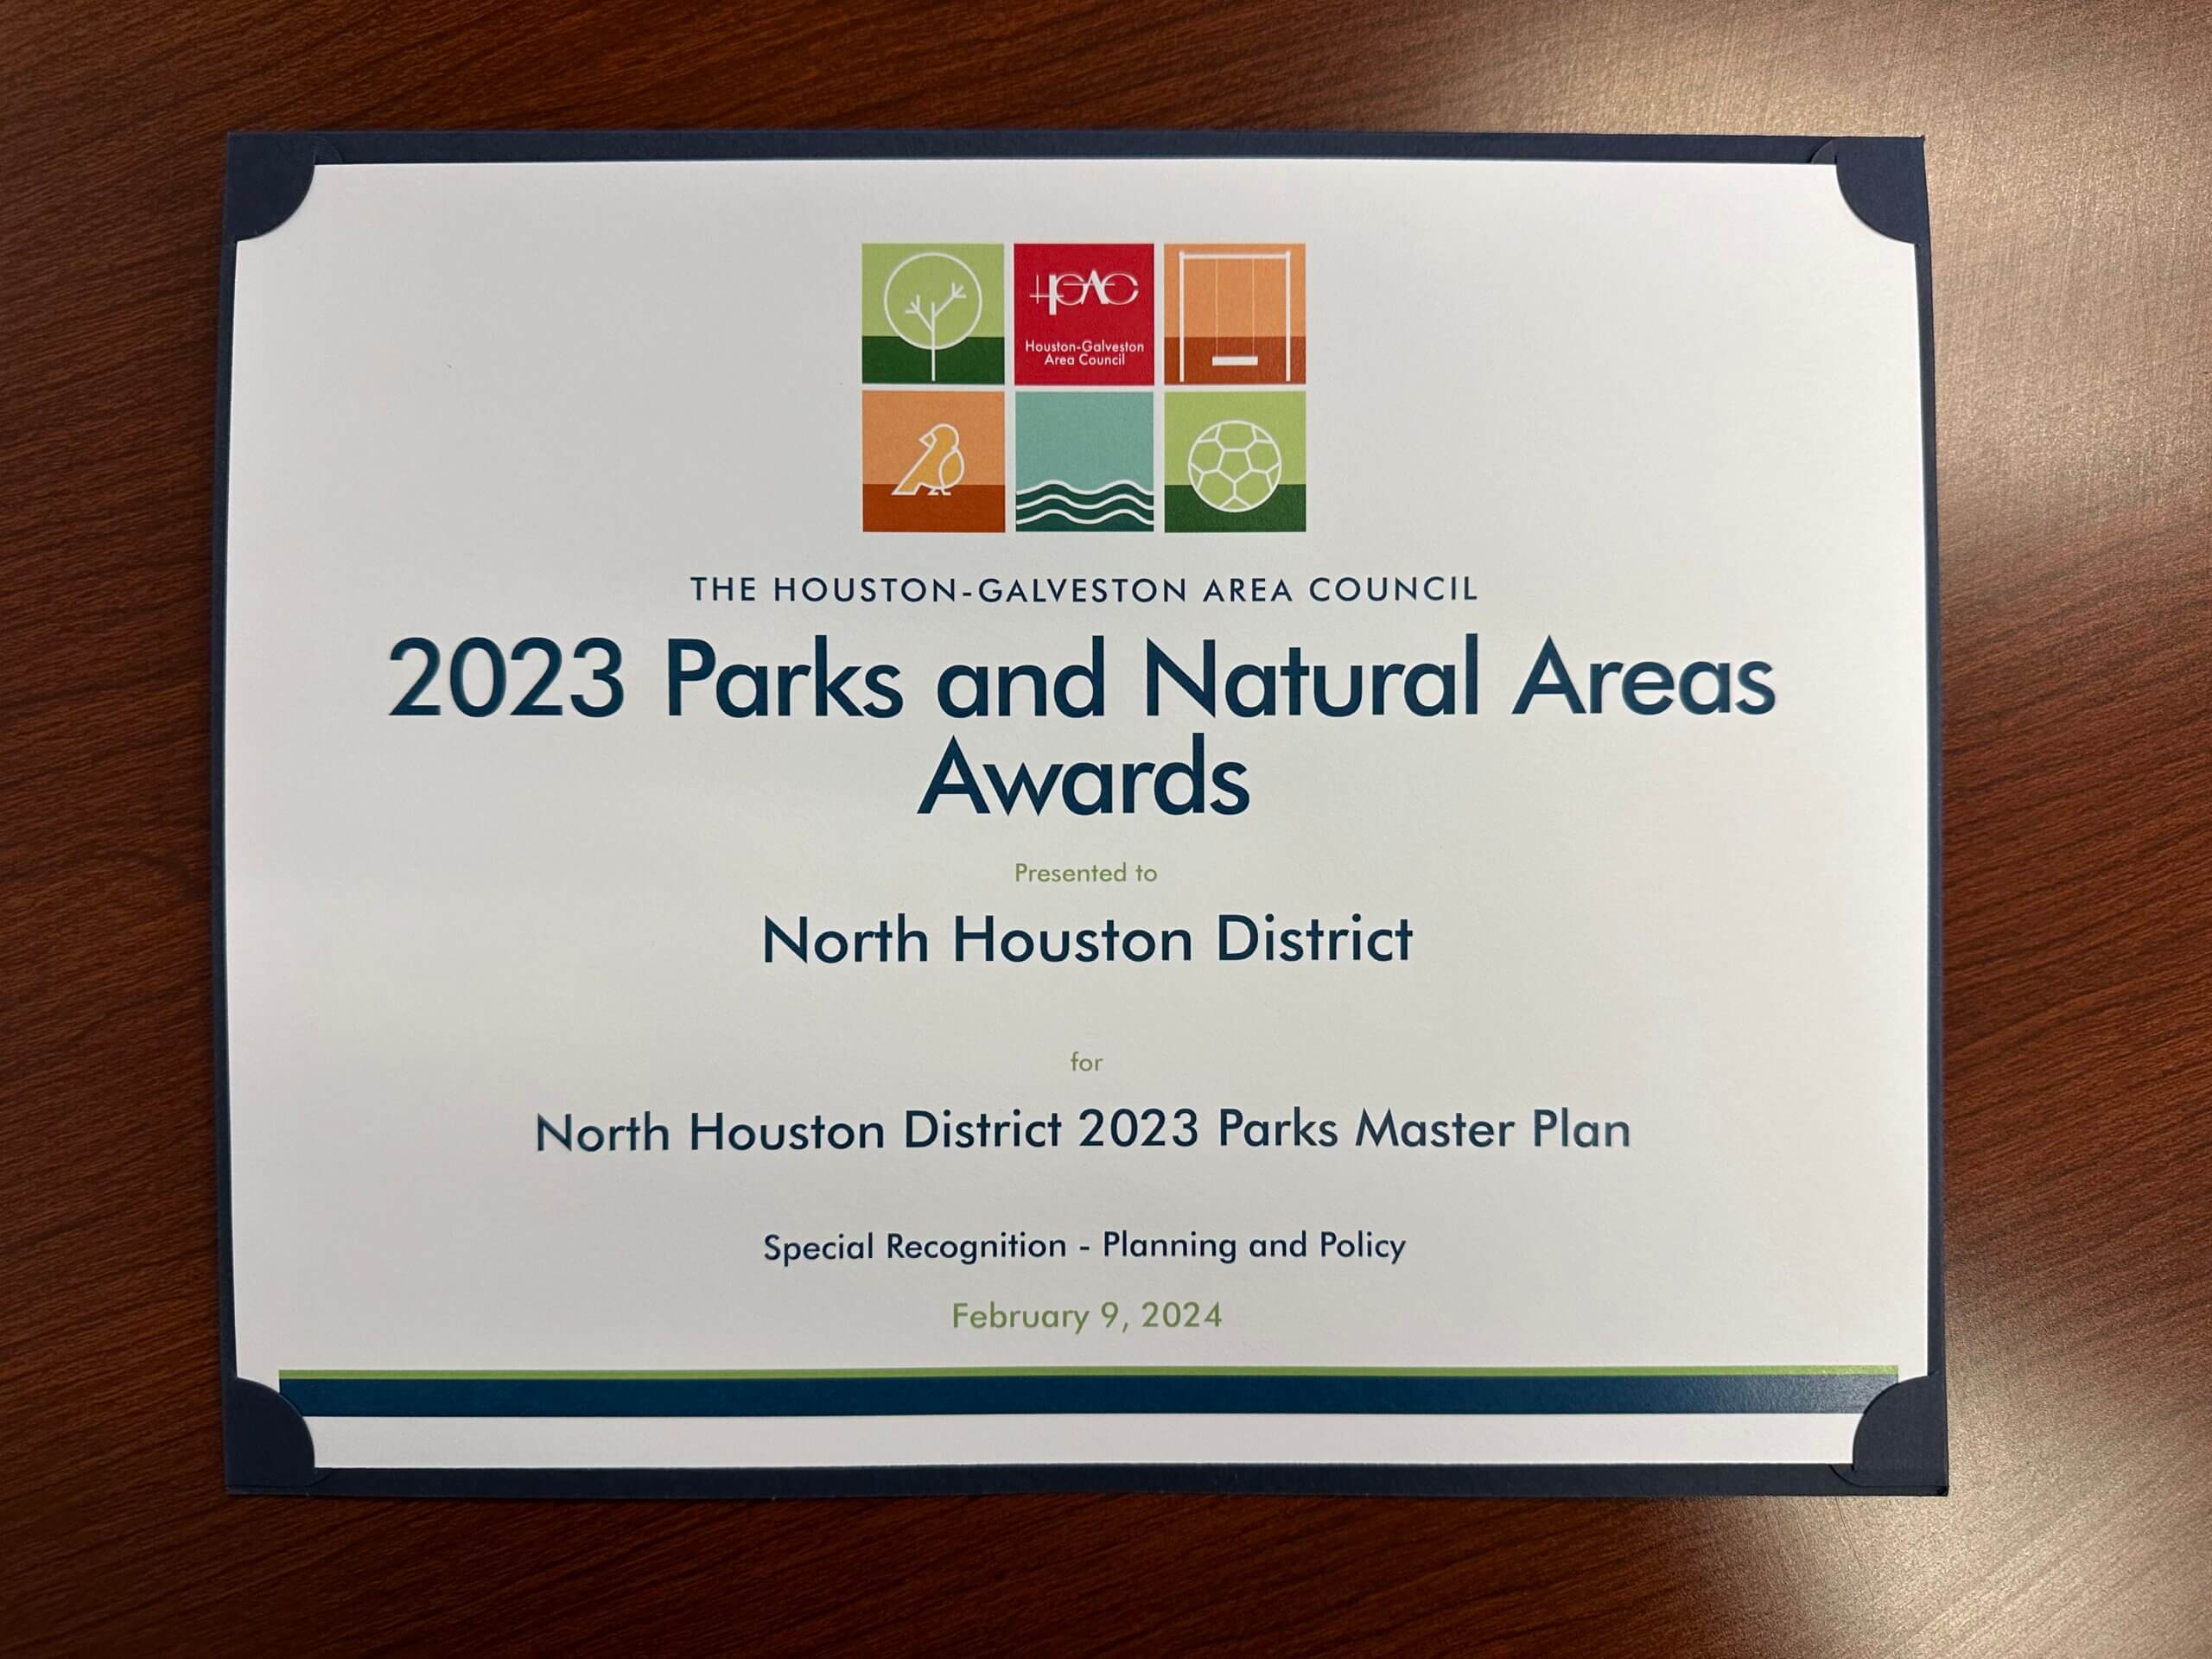 photo of a paper certificate sitting alone on a wooden table. The awards was received by the North Houston District for " 2023 Parks and Natural Areas Award" by Houston Galveston Area Council. 